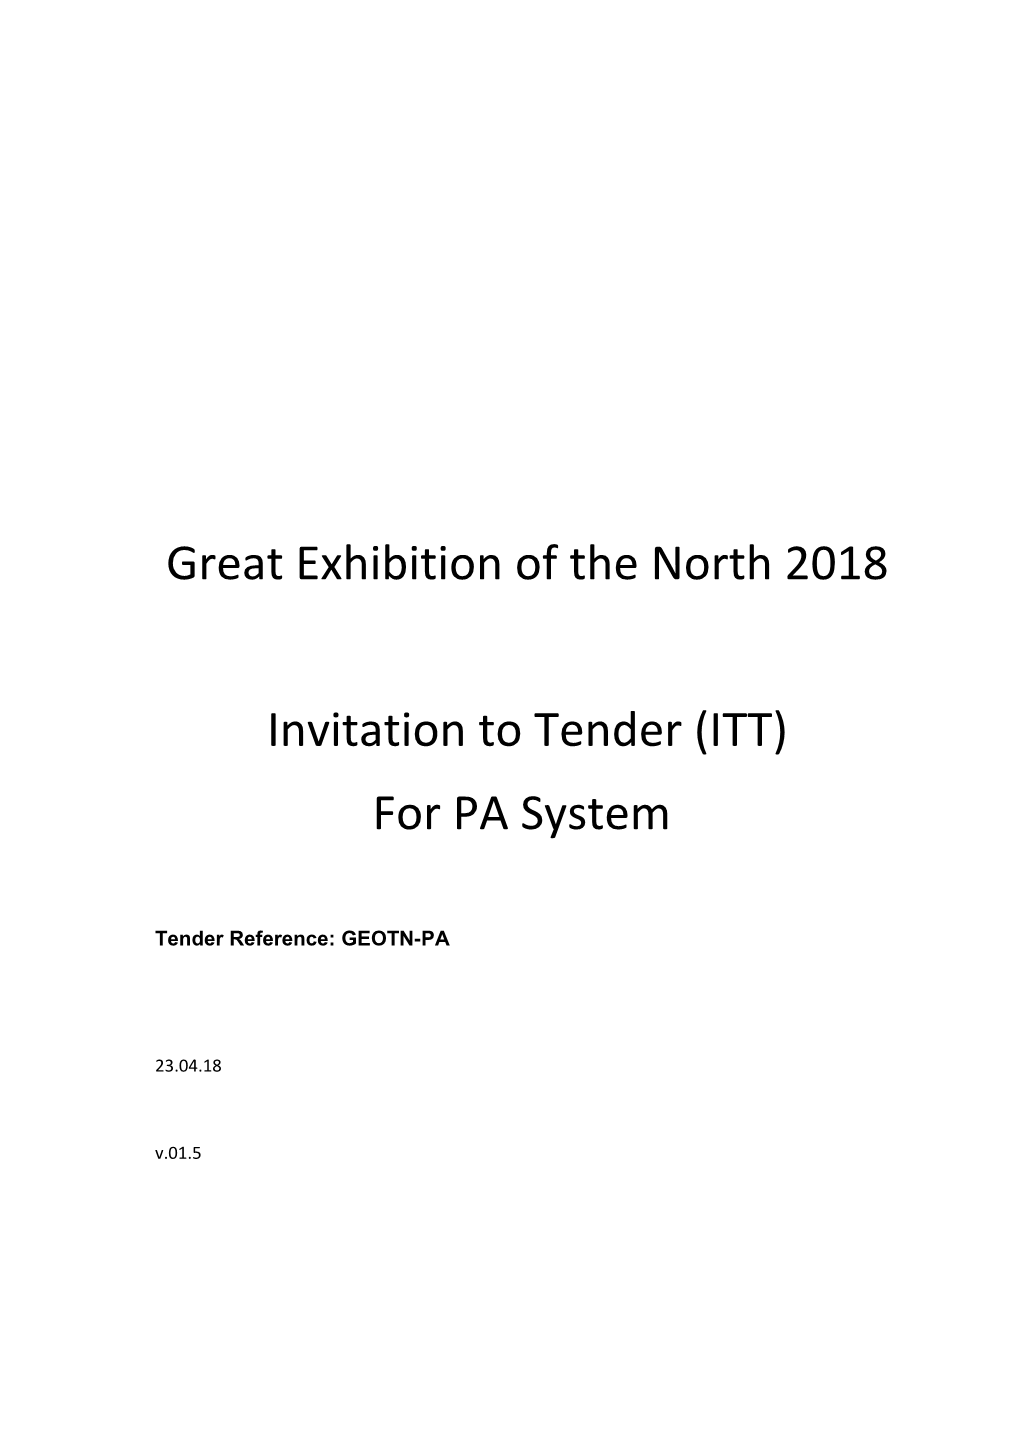 Great Exhibition of the North 2018